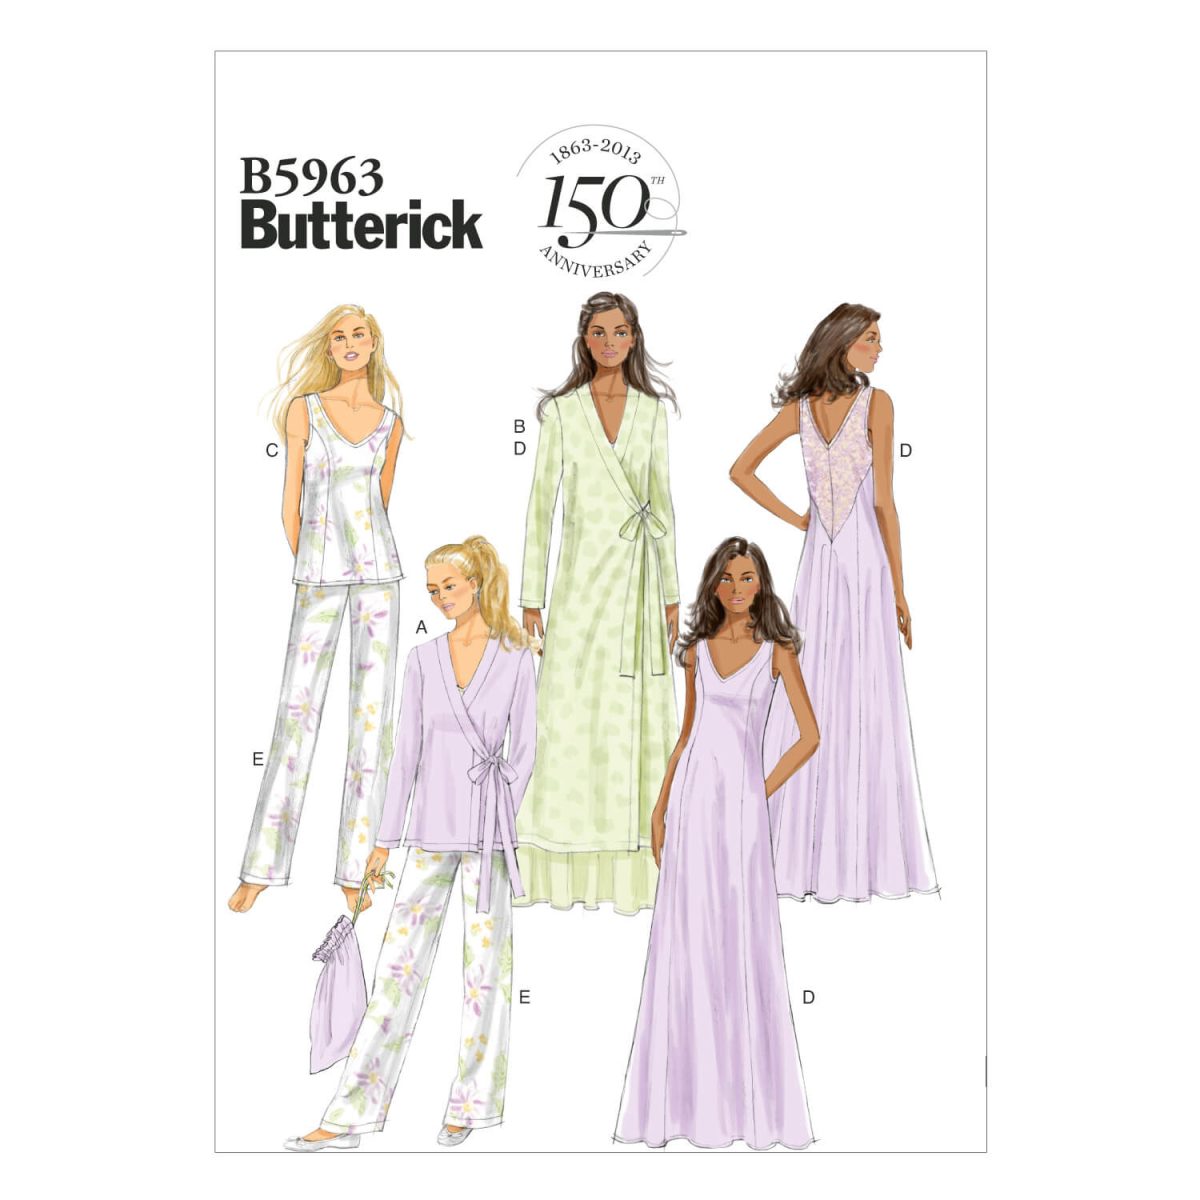 Butterick Sewing Pattern B5963 Misses' Robe, Top, Gown, Pants and Bag